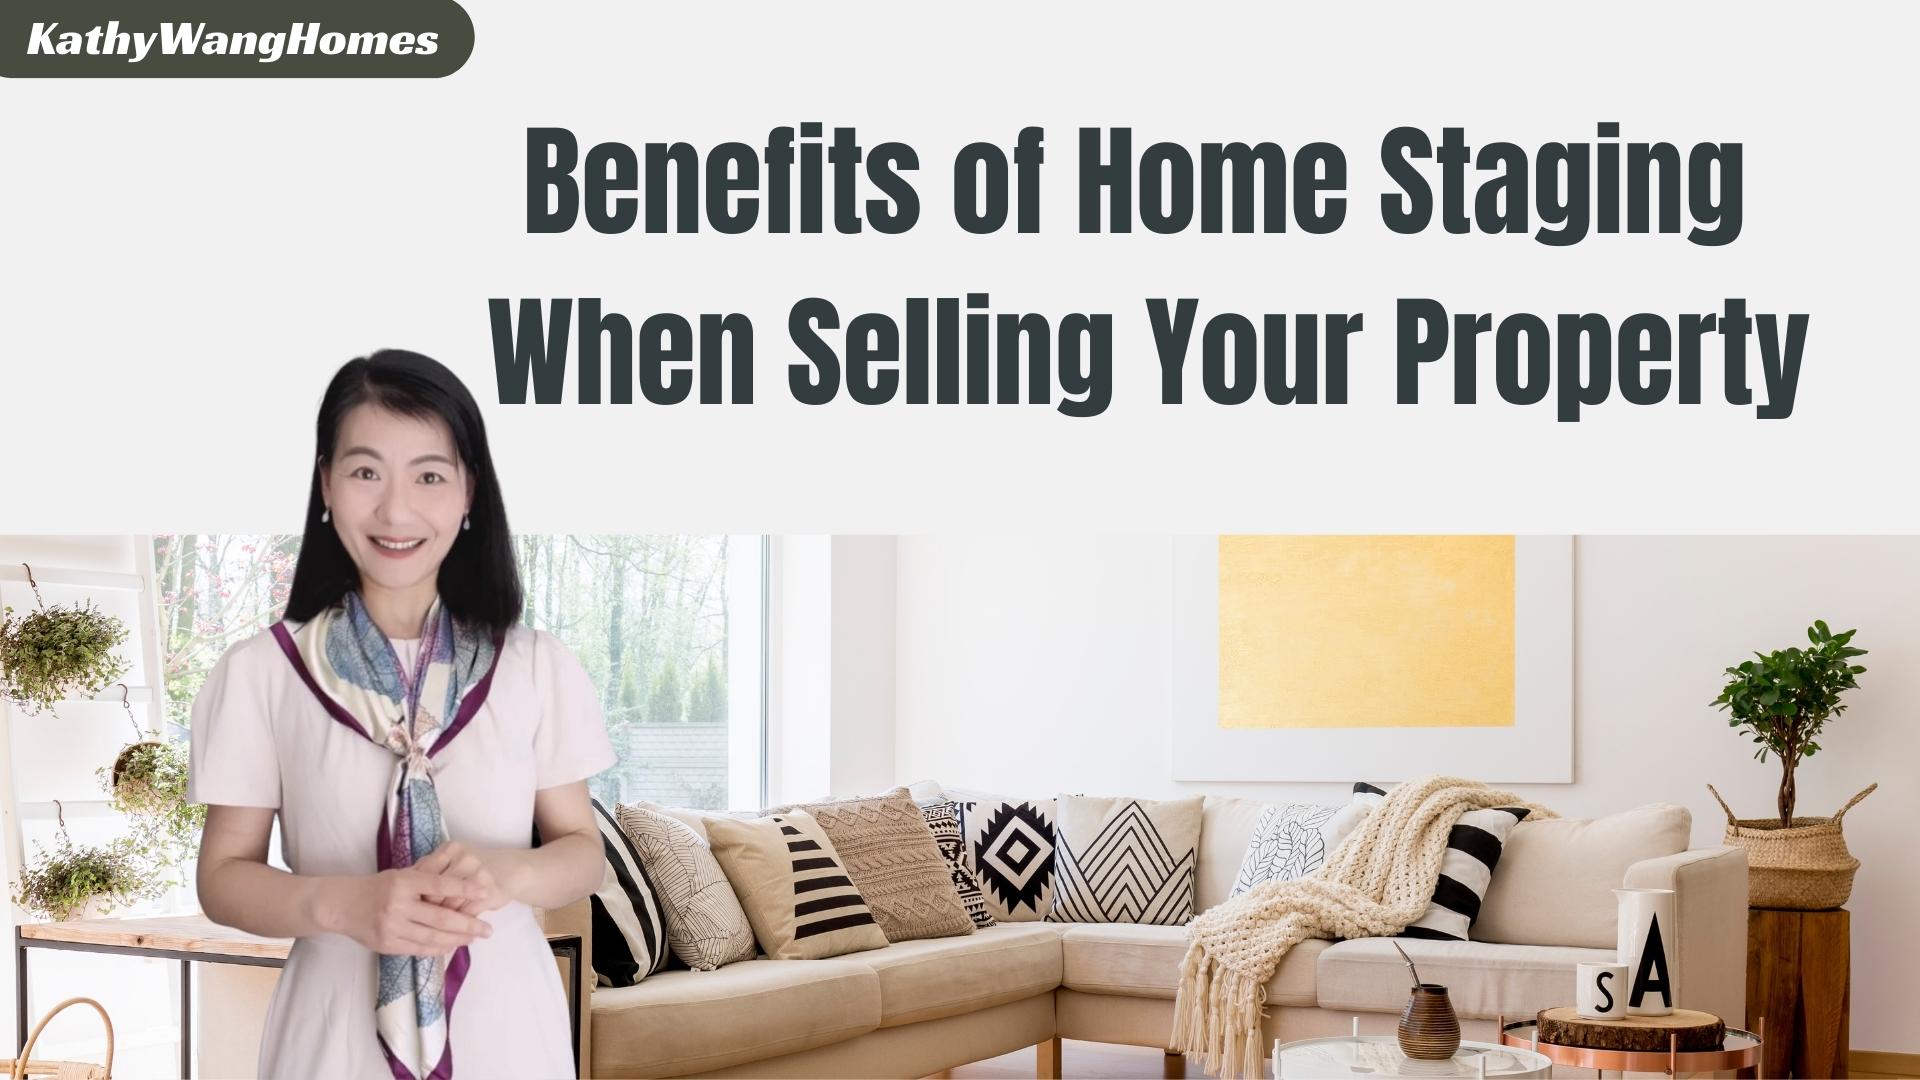 Before selling your home, this preparation can give you great value in return